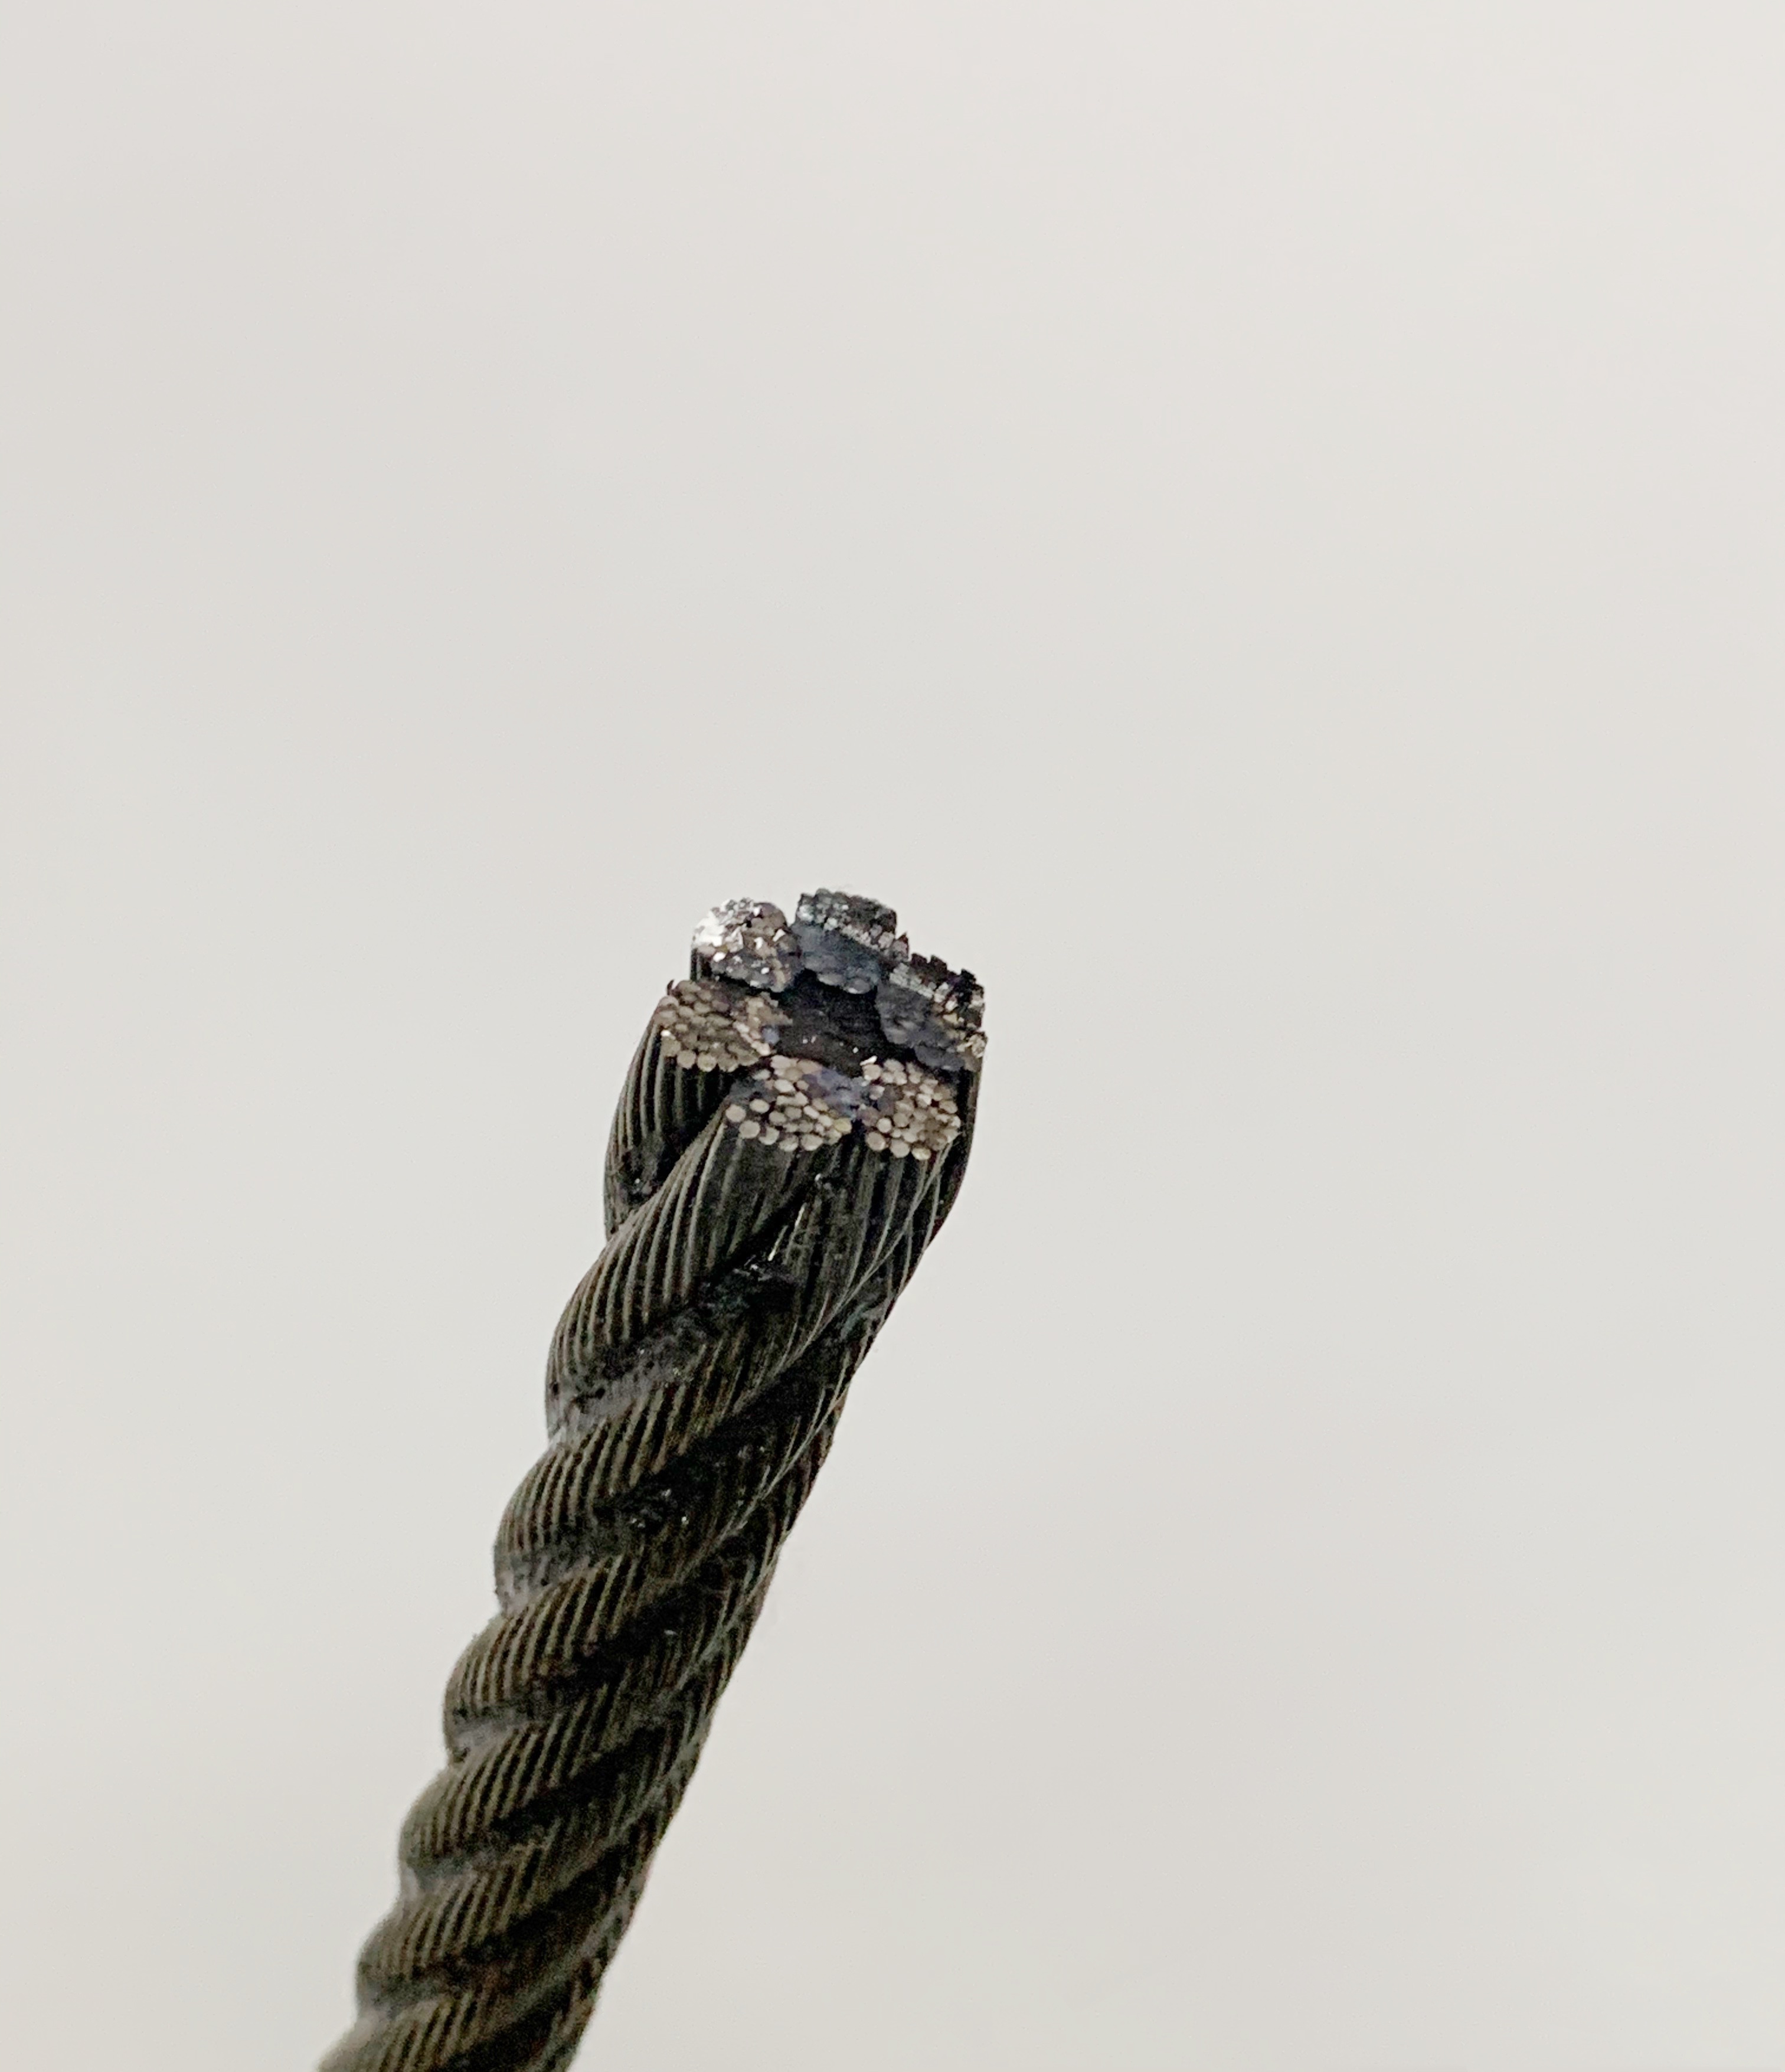 6x36WS FOR WINCHES, HOISTS, SLINGS, MOORING, TOWING, GENERAL LIFTING PURPOSES STEEL WIRE ROPE 